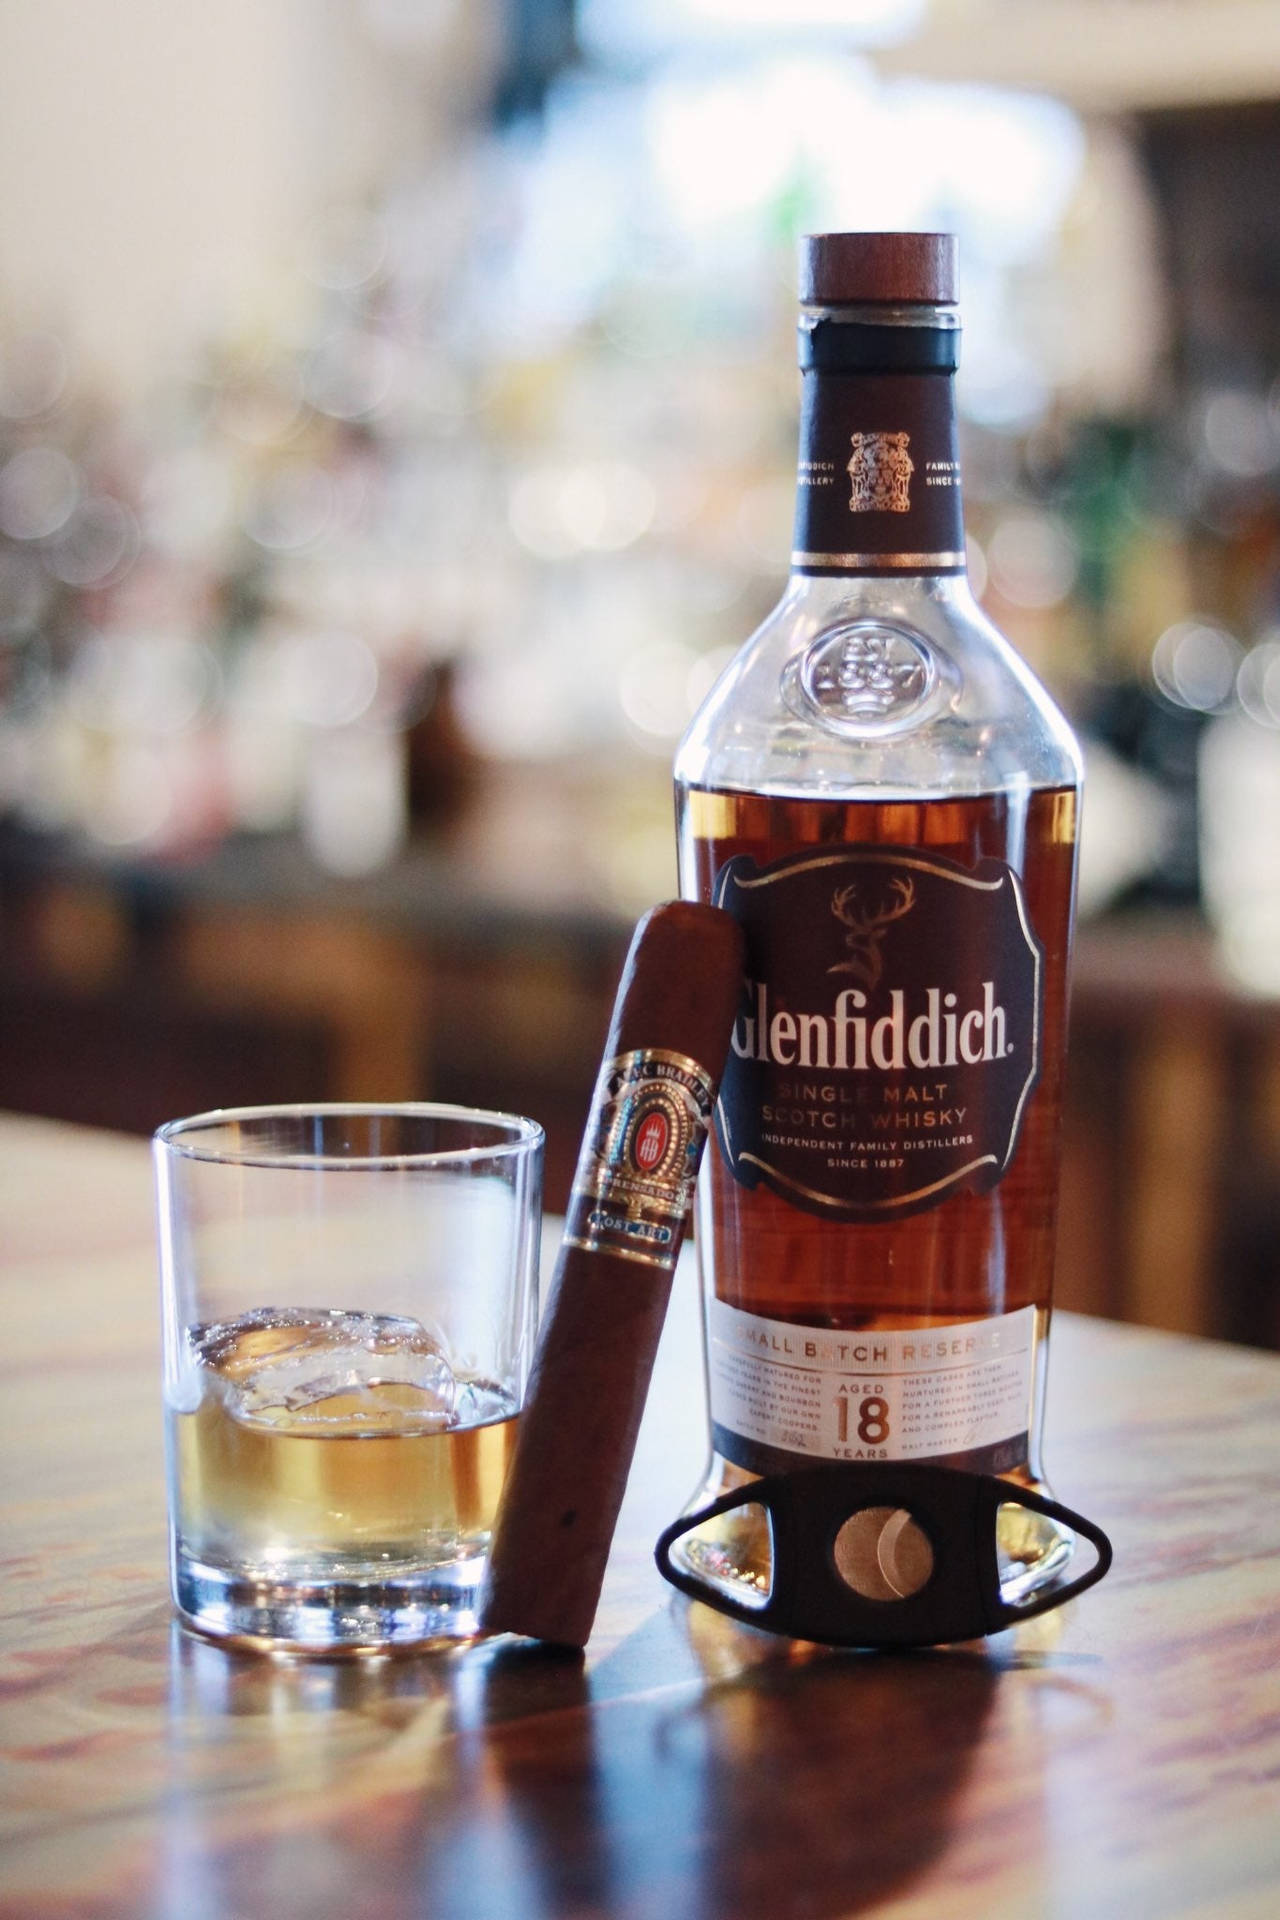 Glenfiddich 18 Year Old With Alec Bradley Cigar Picture